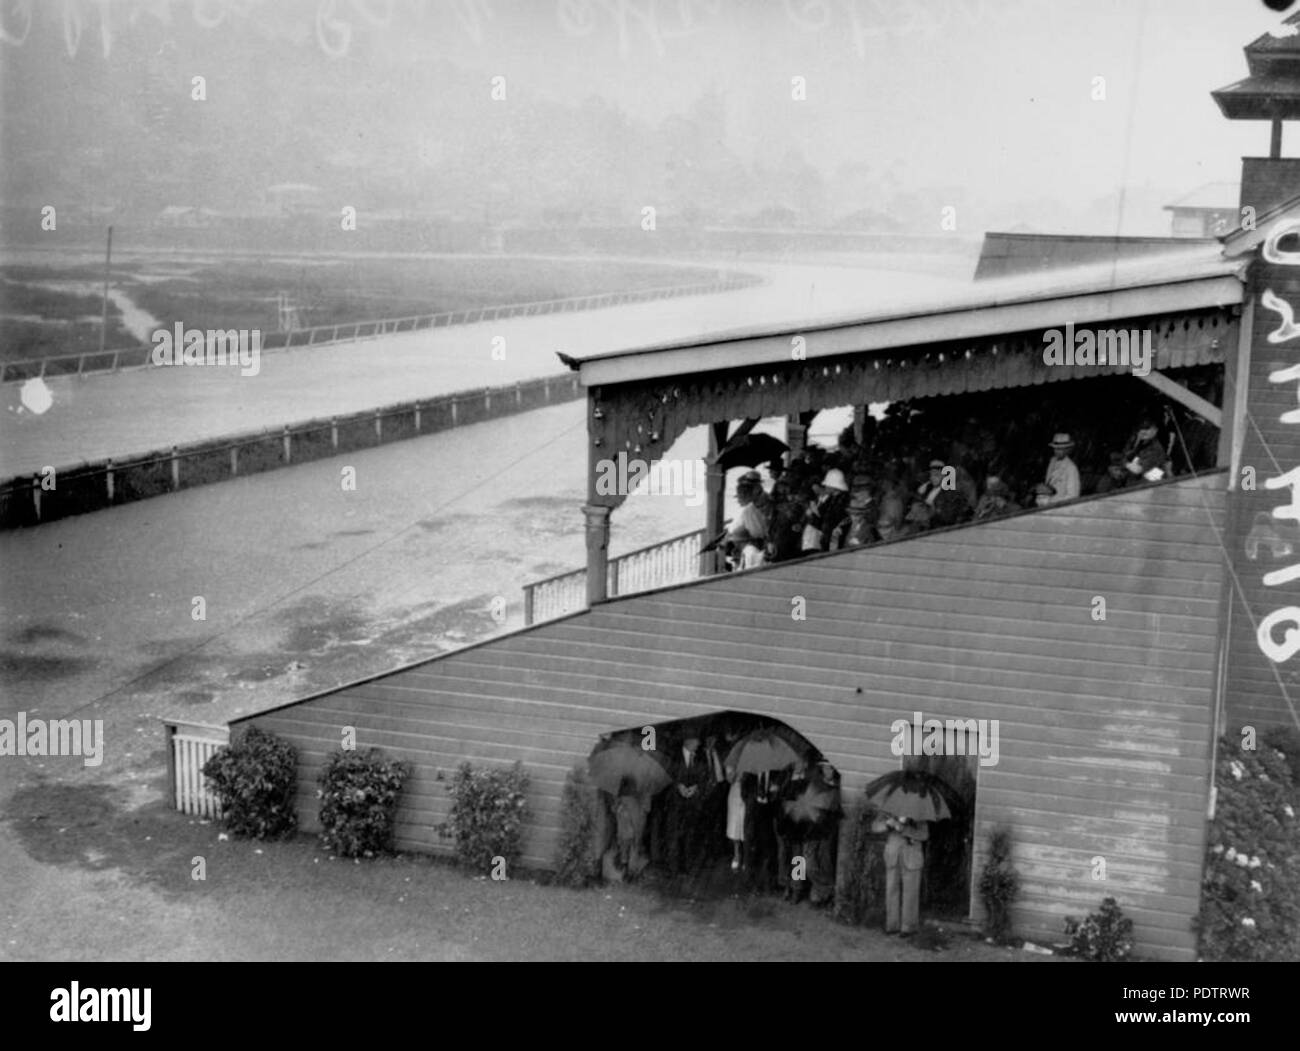 204 StateLibQld 1 108592 Albion Park racetrack after a storm, Brisbane, January 1941 Stock Photo